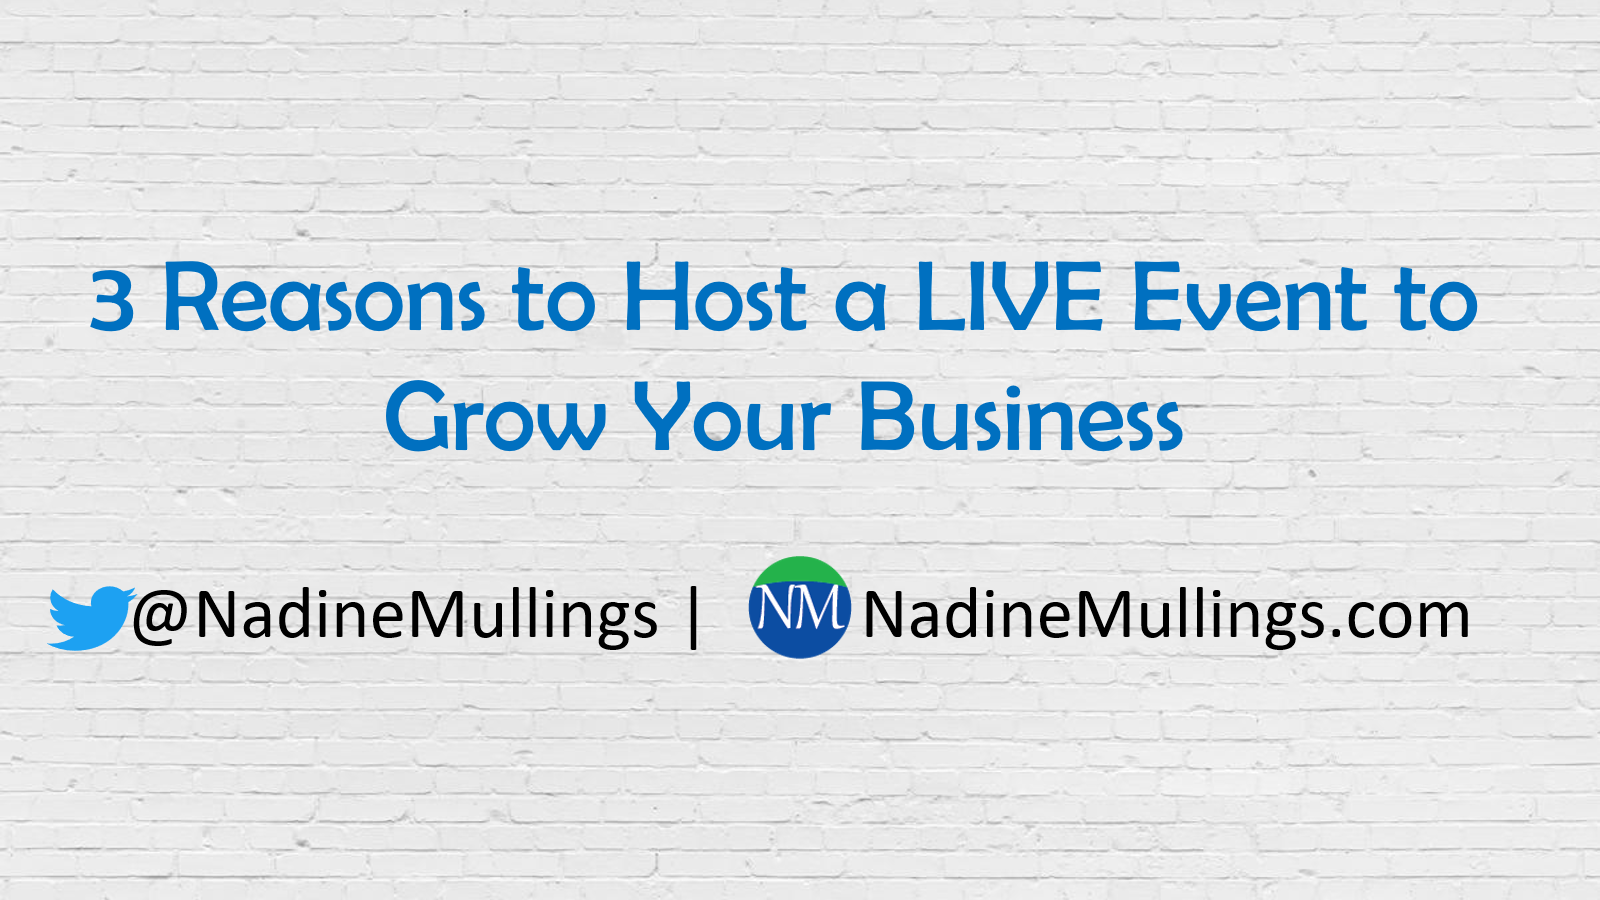 3 Reasons to Host a LIVE Event to Grow Your Business